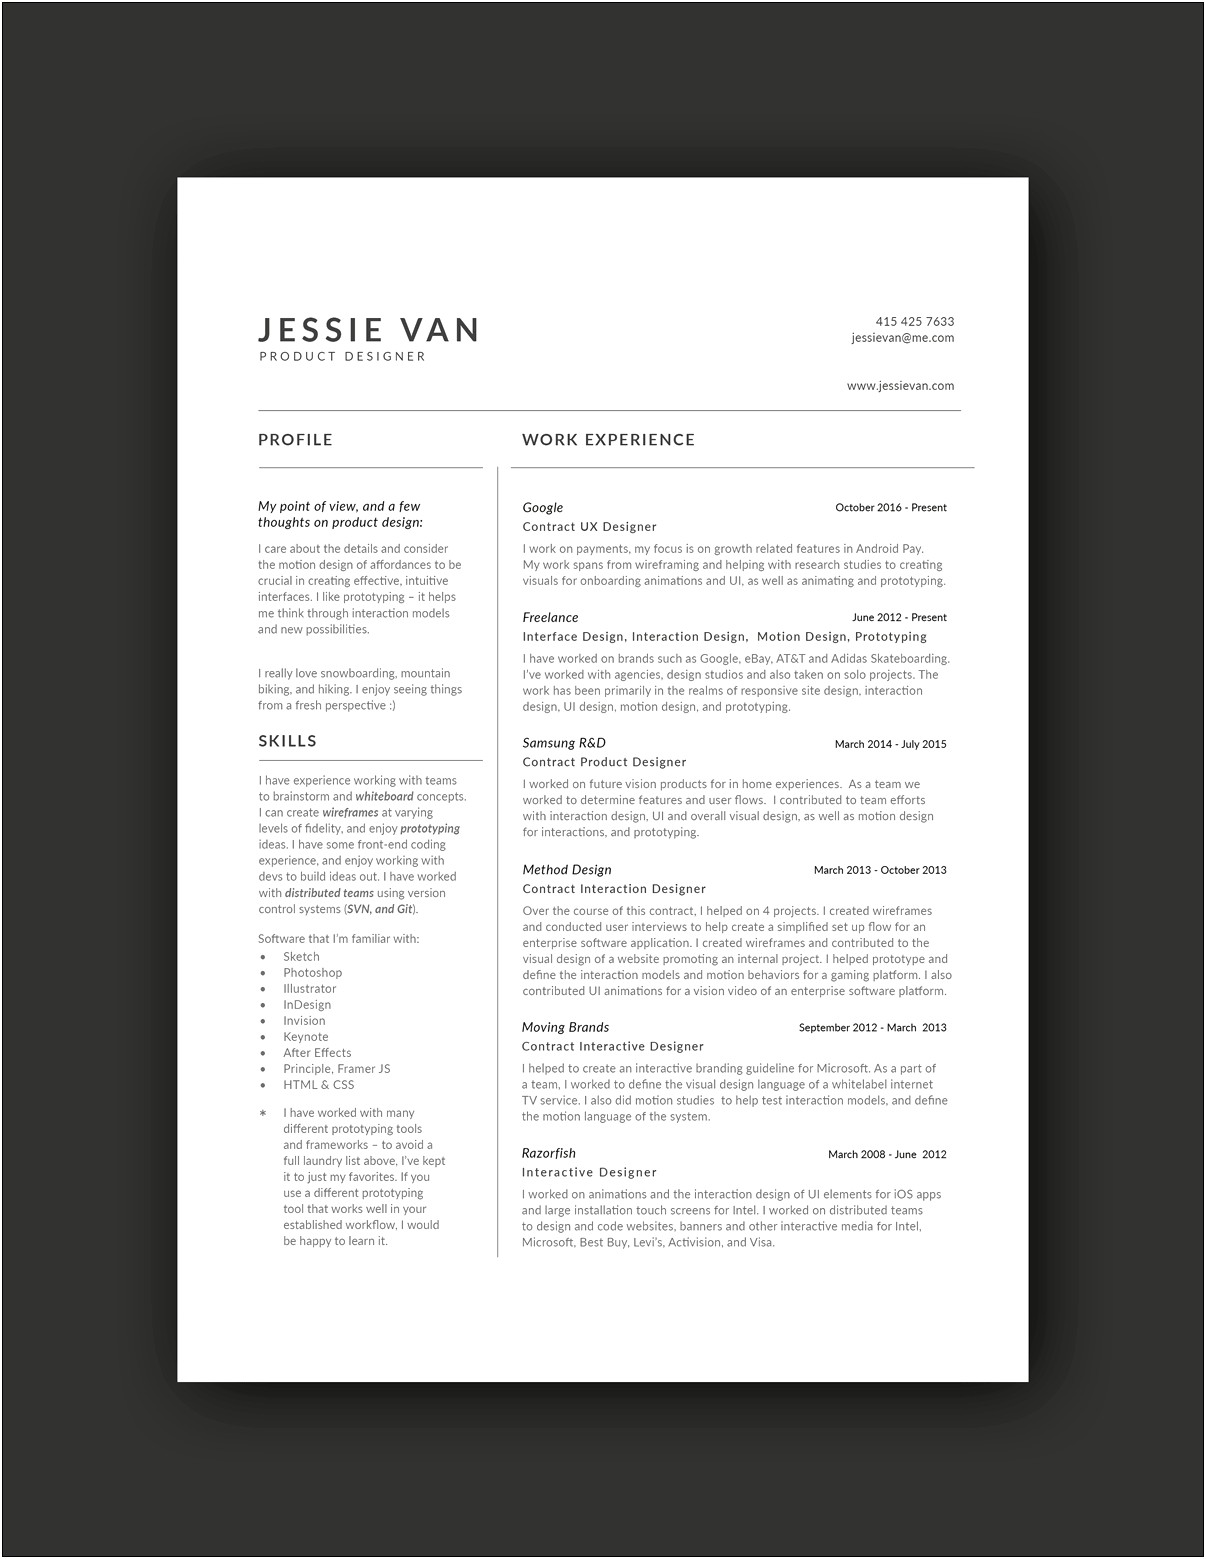 Listing Contract Work On Resume Example